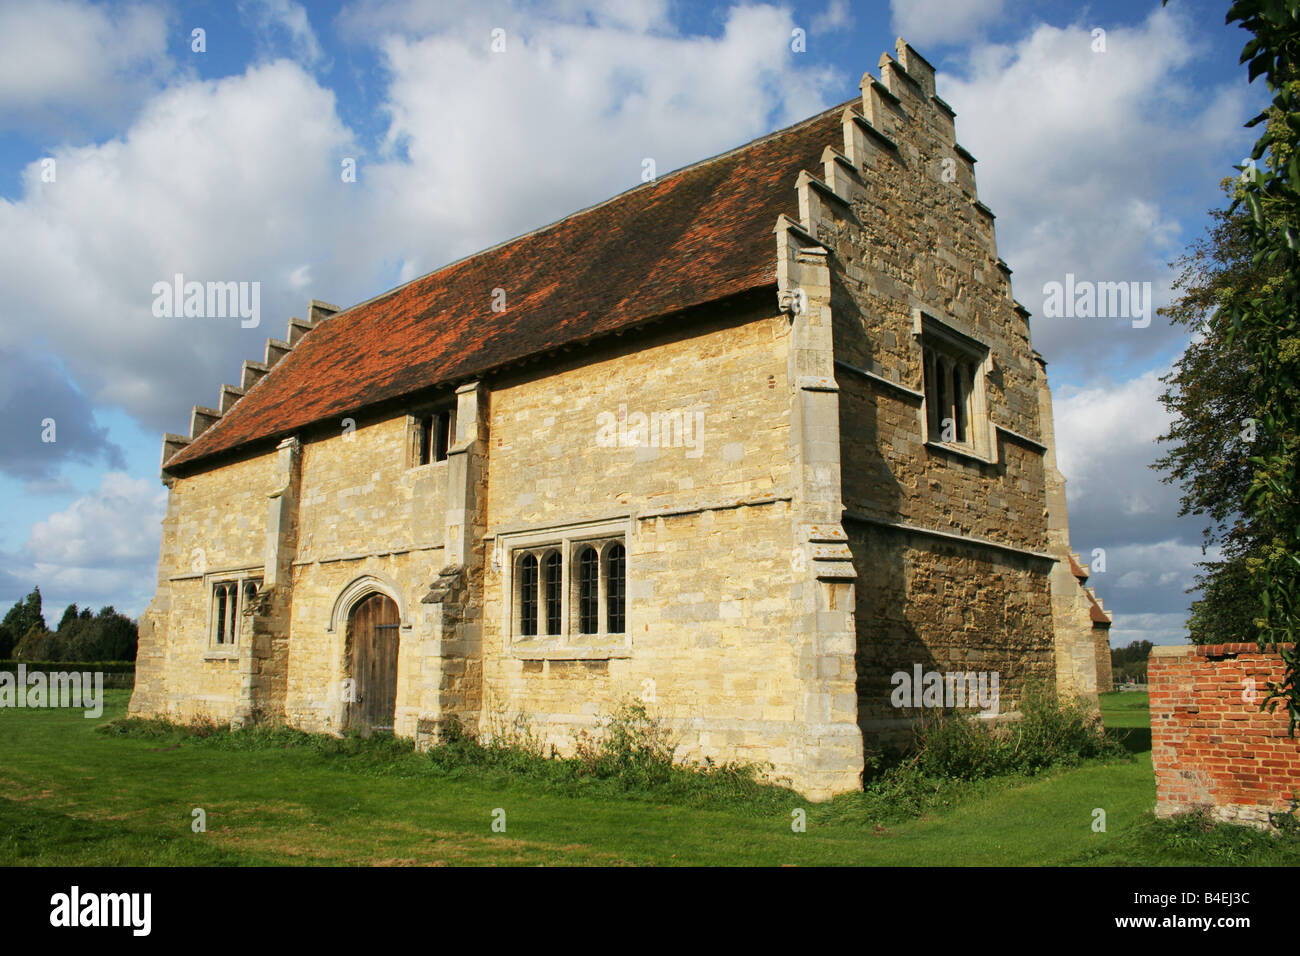 The Stables at Willington, Bedfordshire Stock Photo